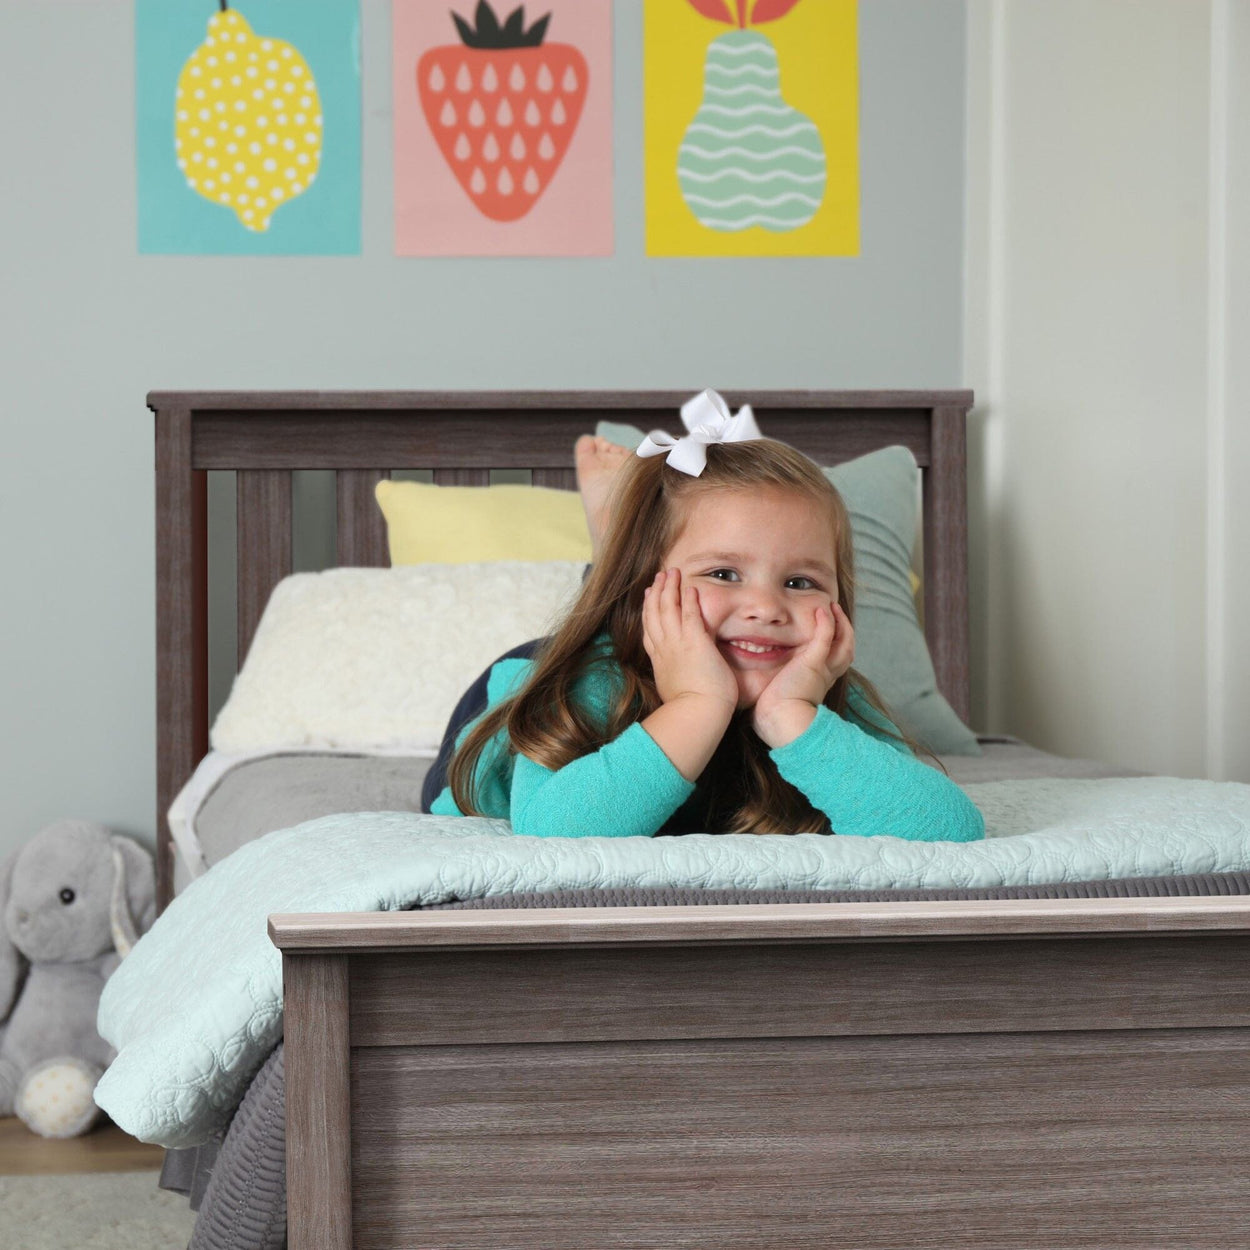 180210-151 : Kids Beds Classic Twin-Size Platform Bed, Clay